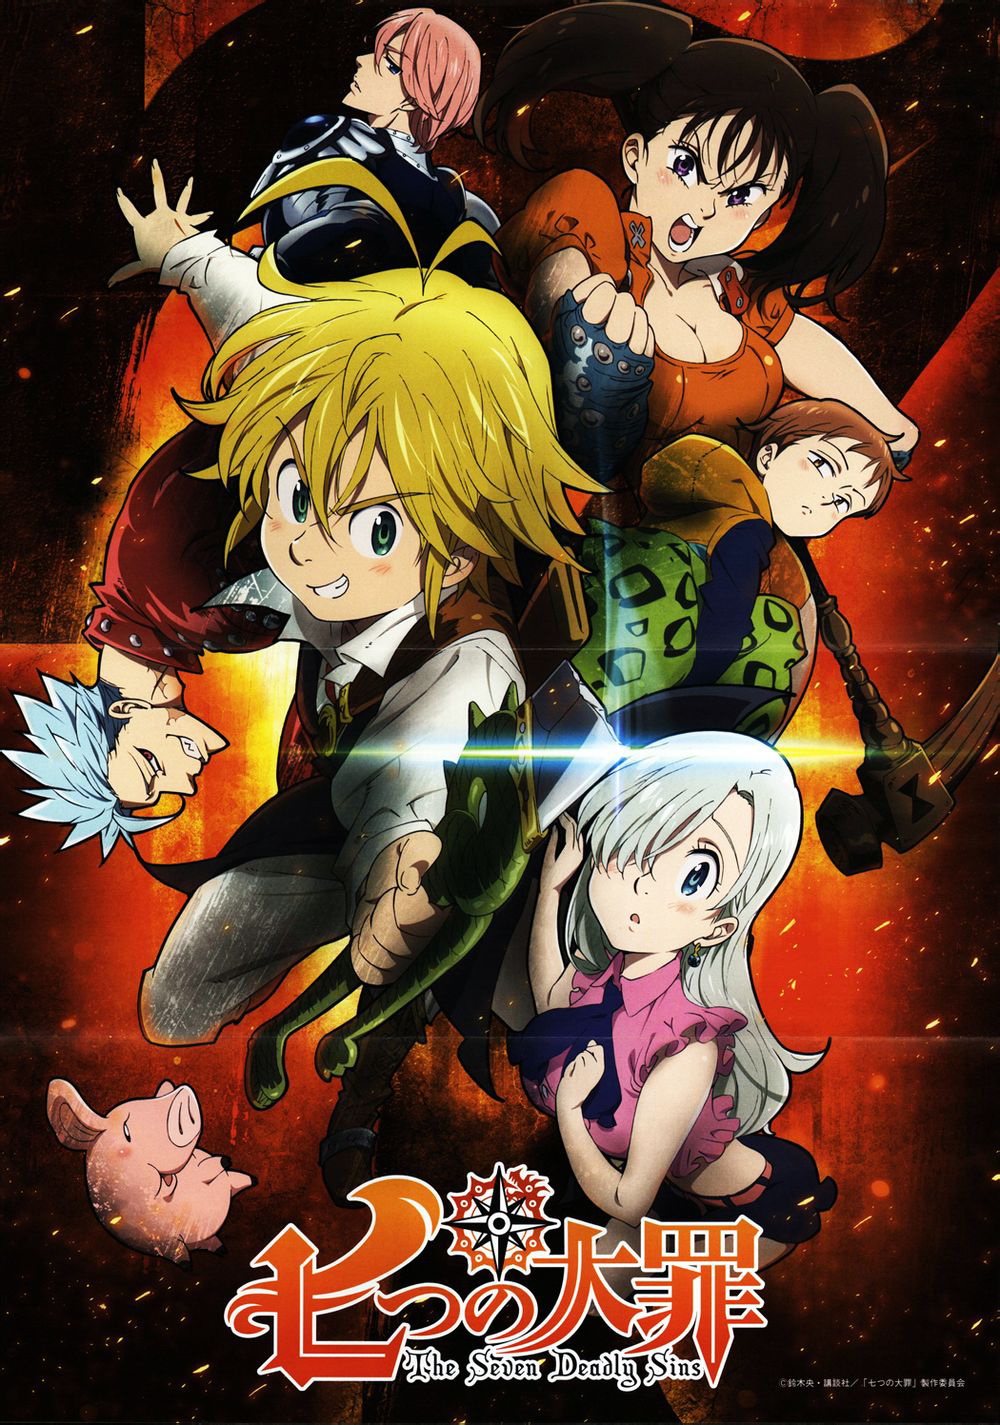 Watch 七つの大罪 Nanatsu No Taizai The Seven Deadly Sins 第1話 七つの大罪 With Original Japanese Voice And Interactive Subtitles